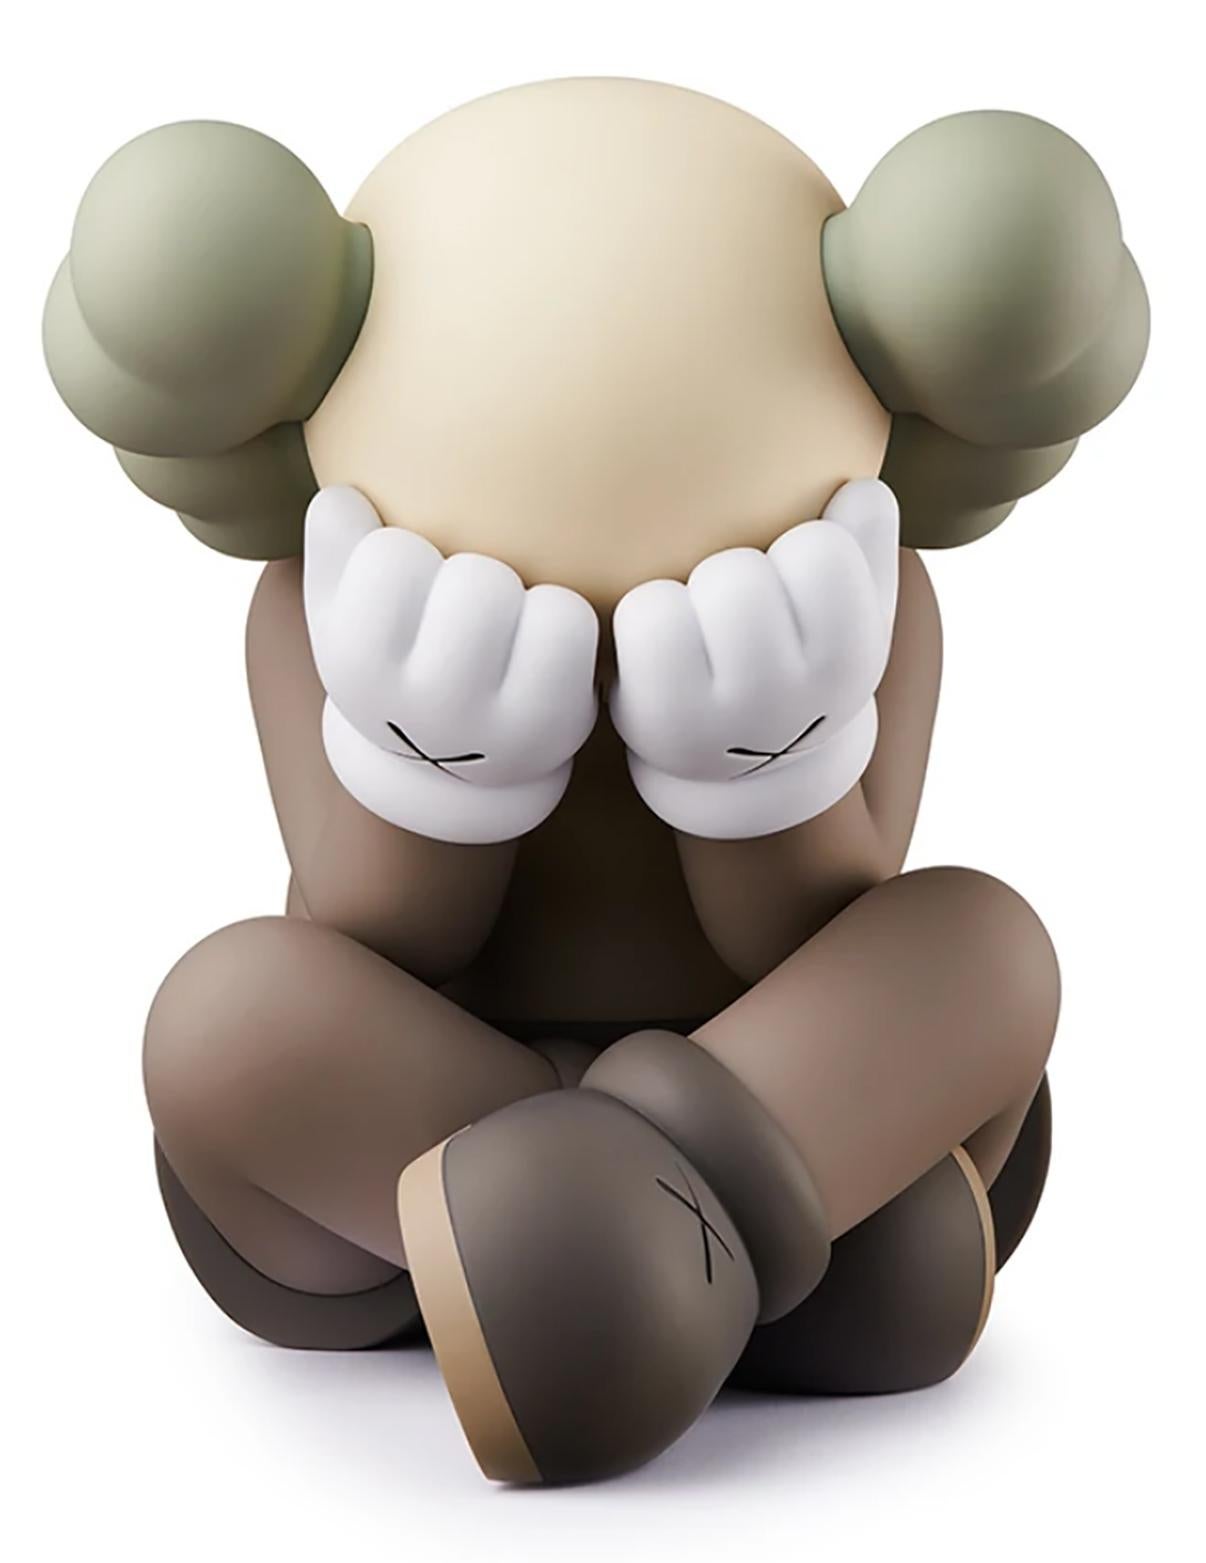 KAWS SEPARATED (Complete Set of 3 Works): each new & unopened in original packaging:
This highly collectible KAWS SEPARATED set is derived from the Brooklyn based artist’s larger scale sculpture of same (originally constructed in 2019), and is a key